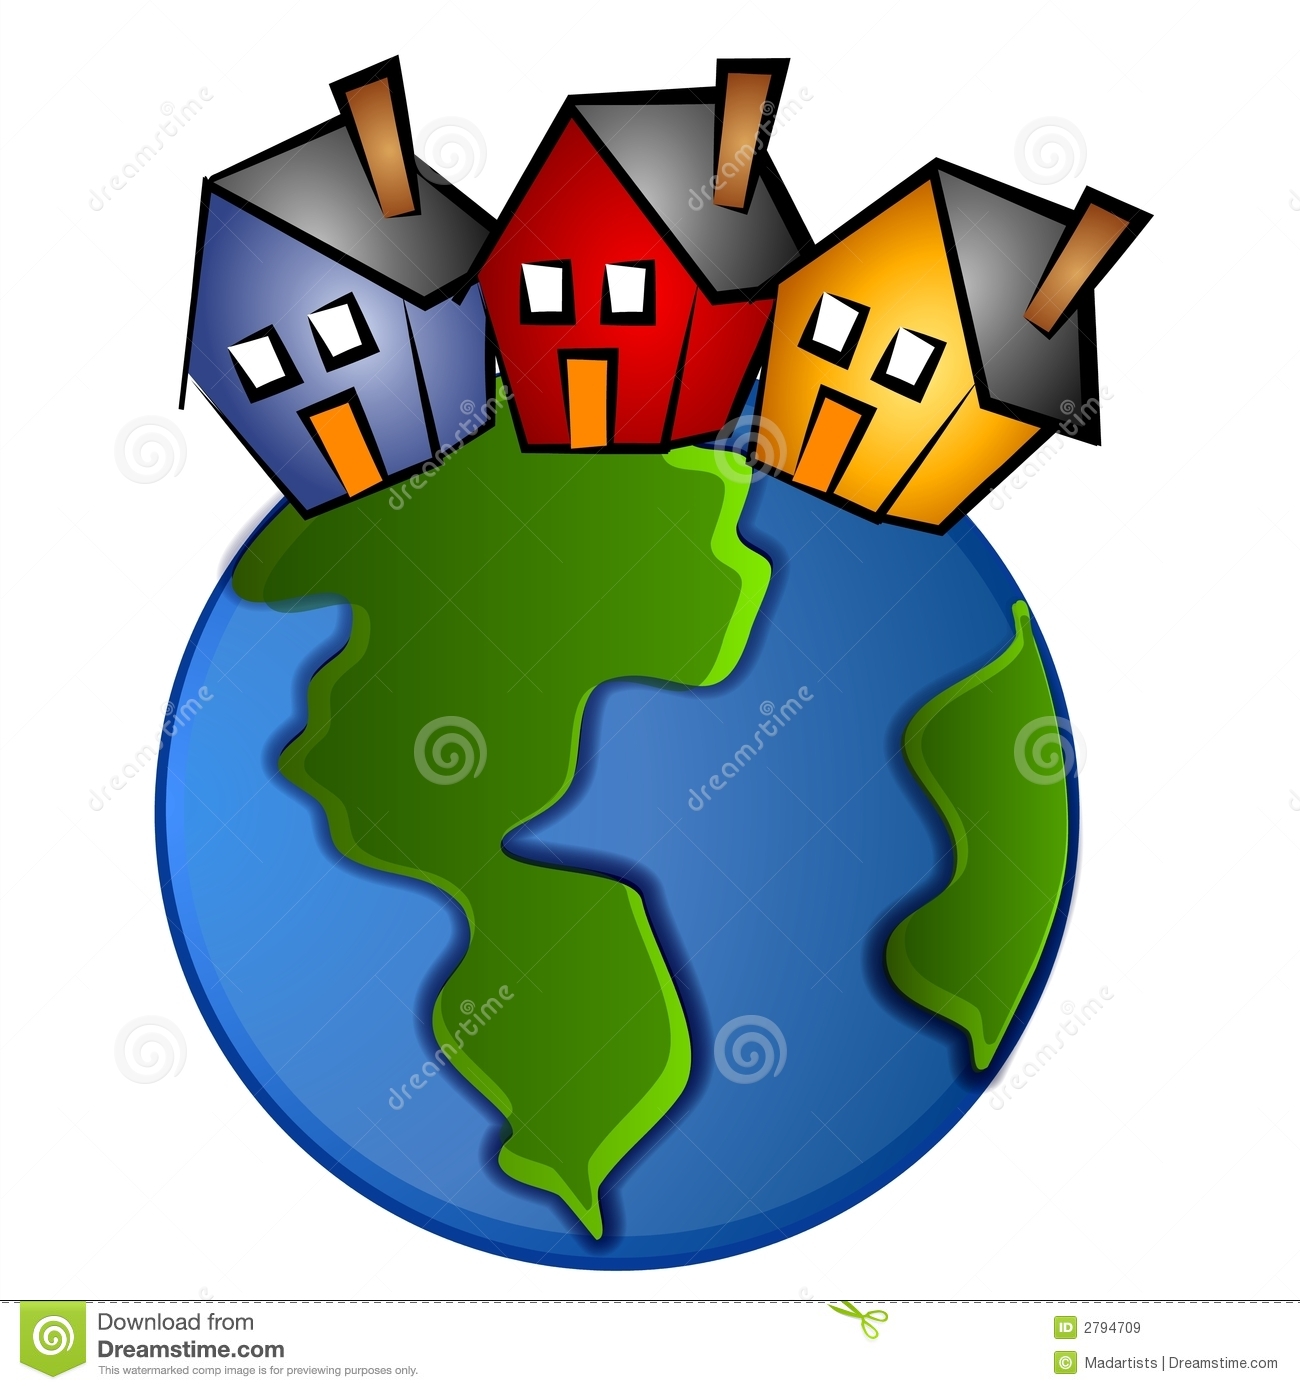 Clip Art Illustration Of The Earth With 3 Houses On Top